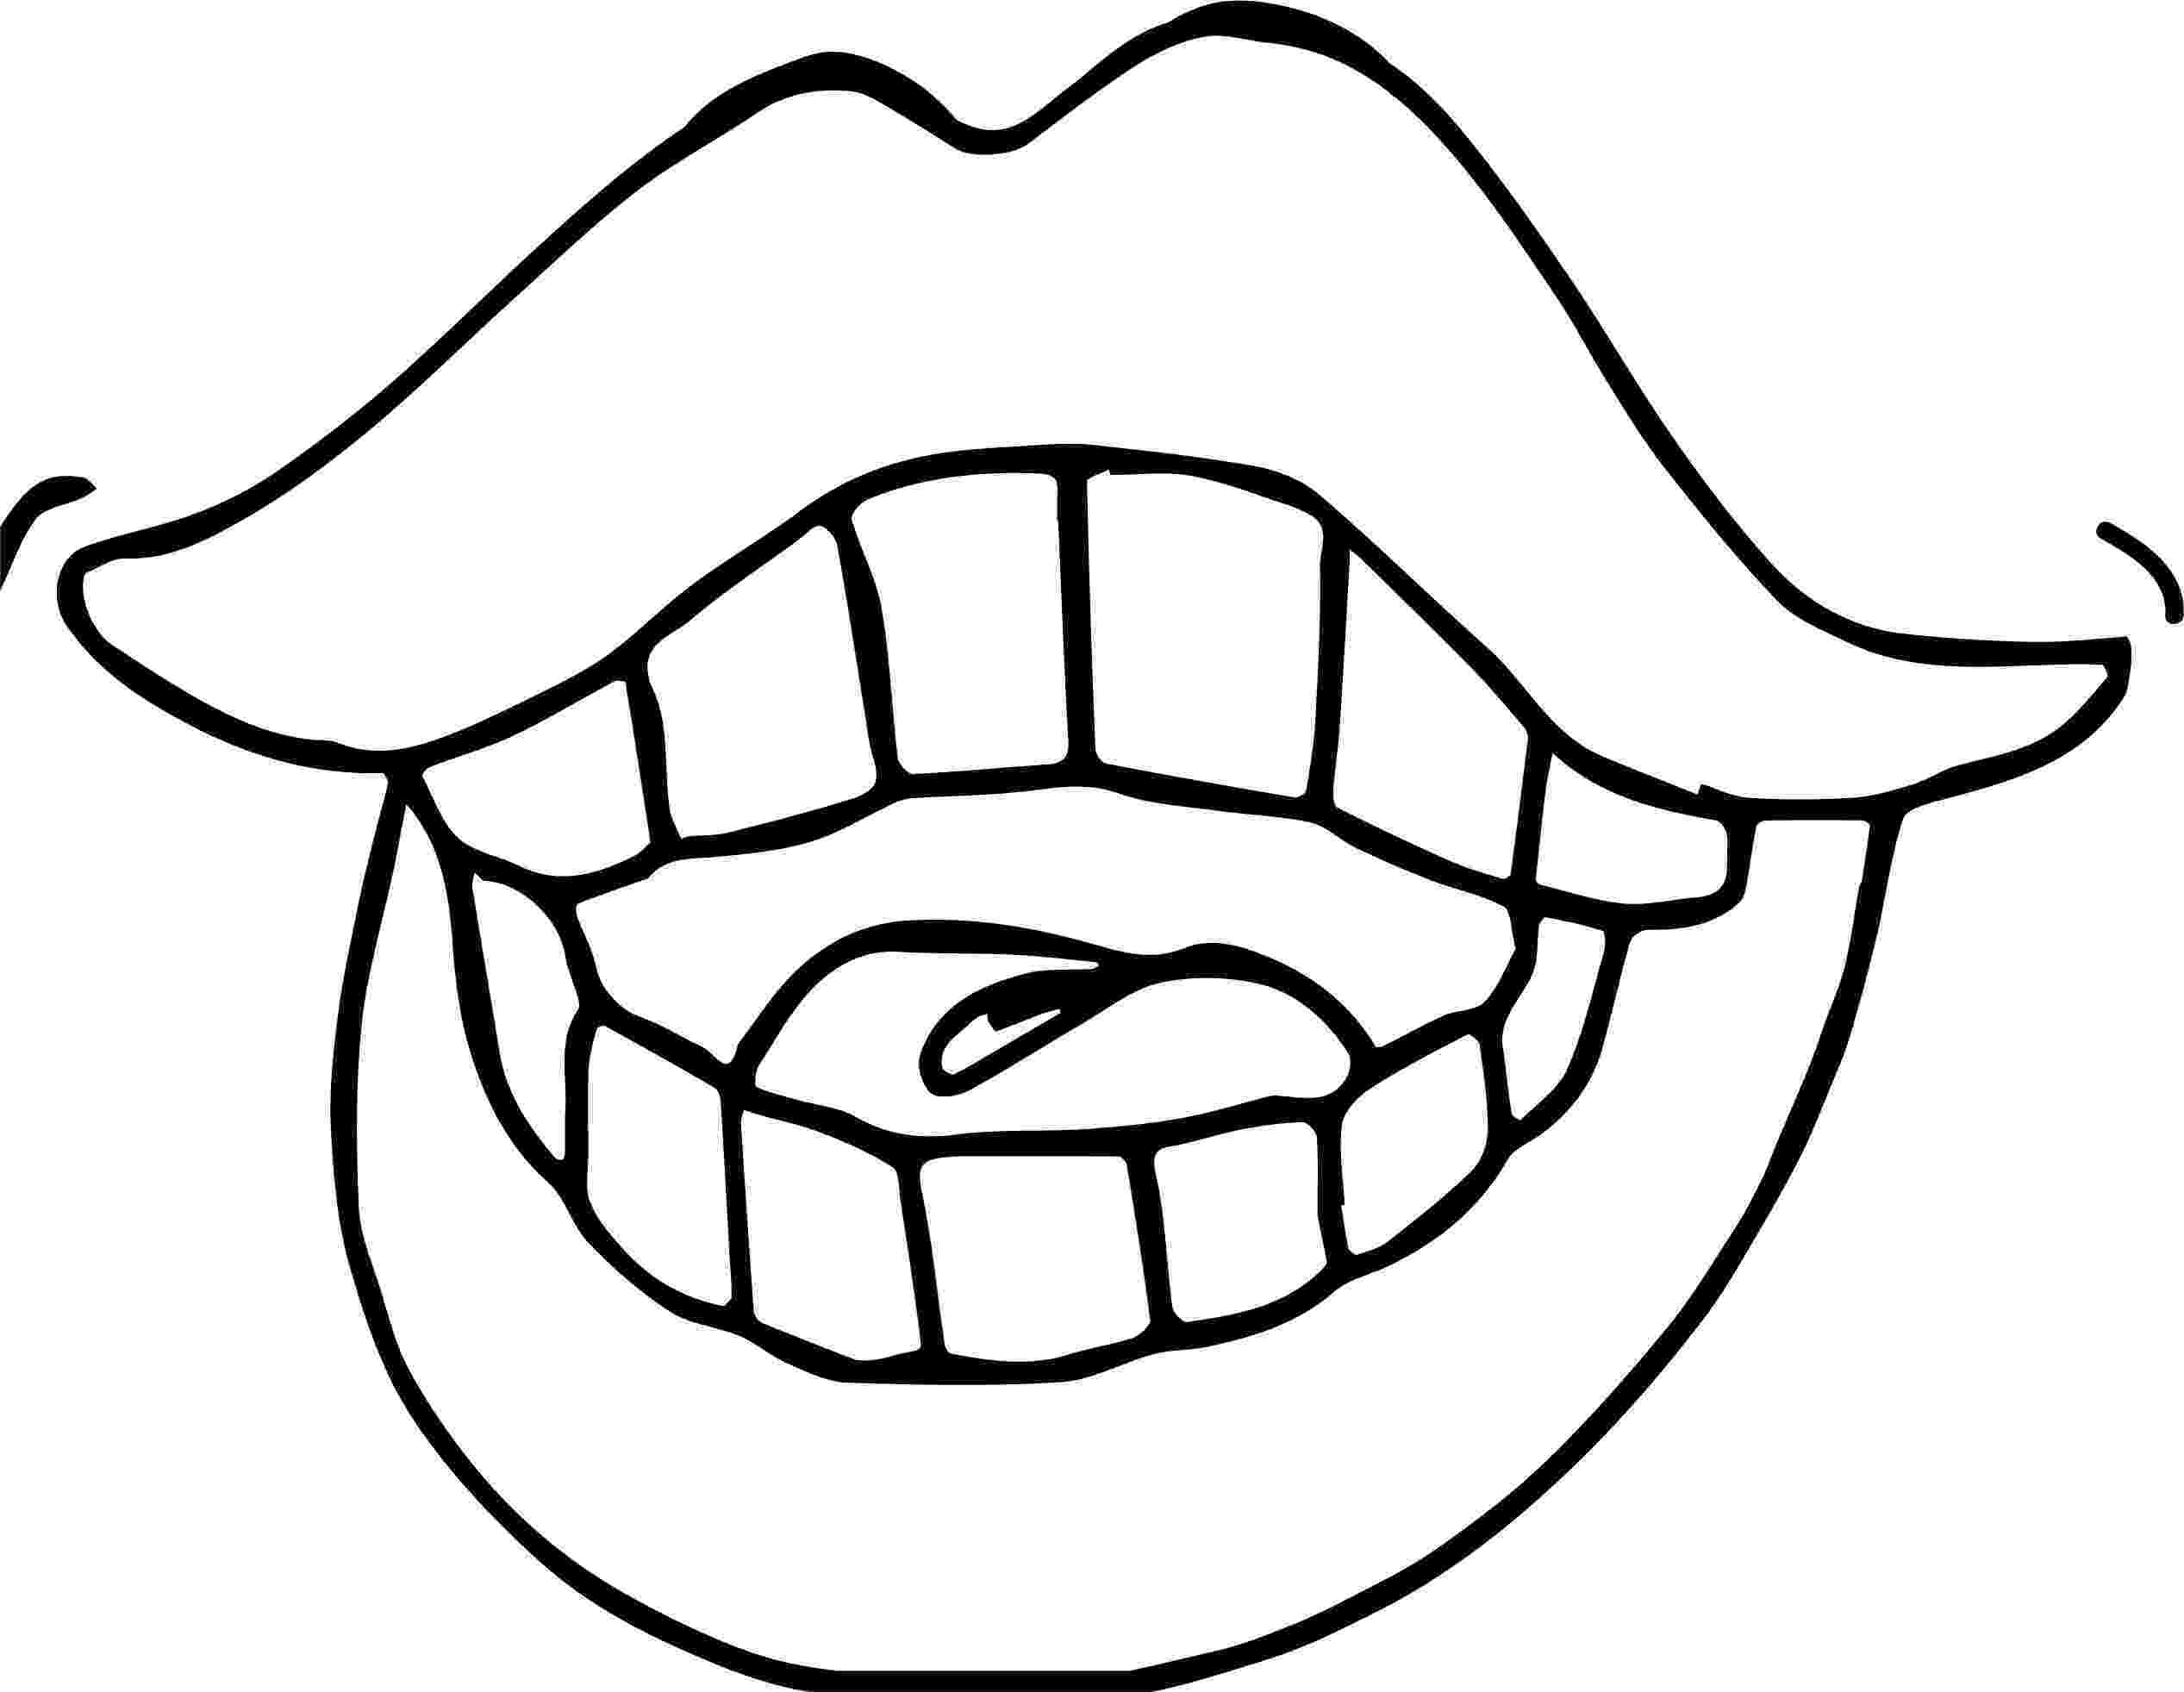 lips coloring page lips and flowers colouring page instant digital download page lips coloring 